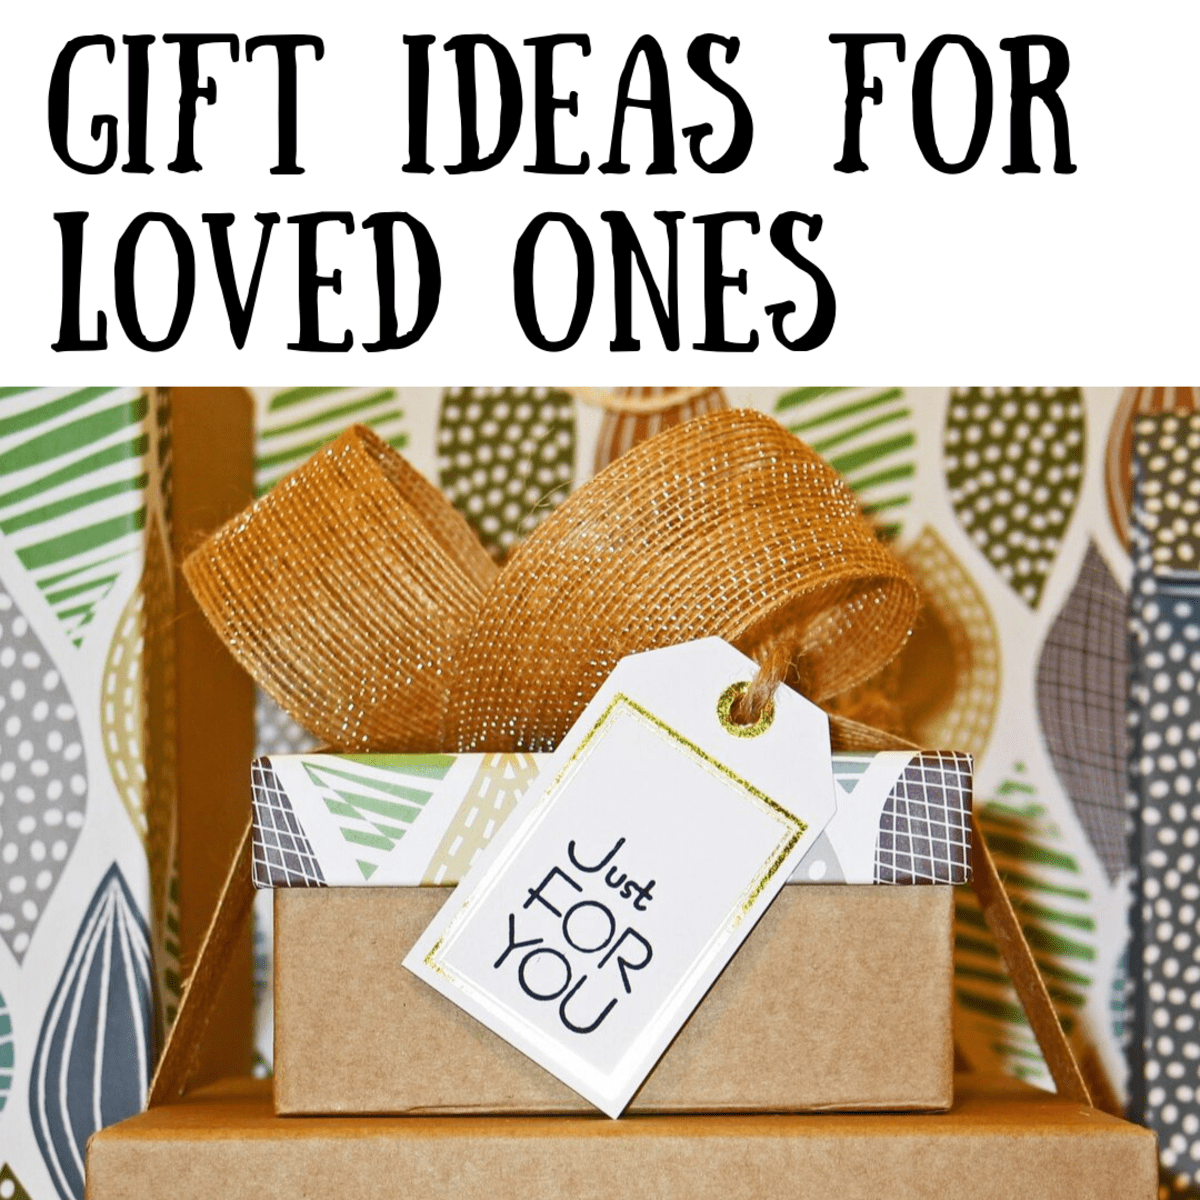 Gifts for Senior Citizens: Great Ideas for Elderly Loved Ones - Holidappy